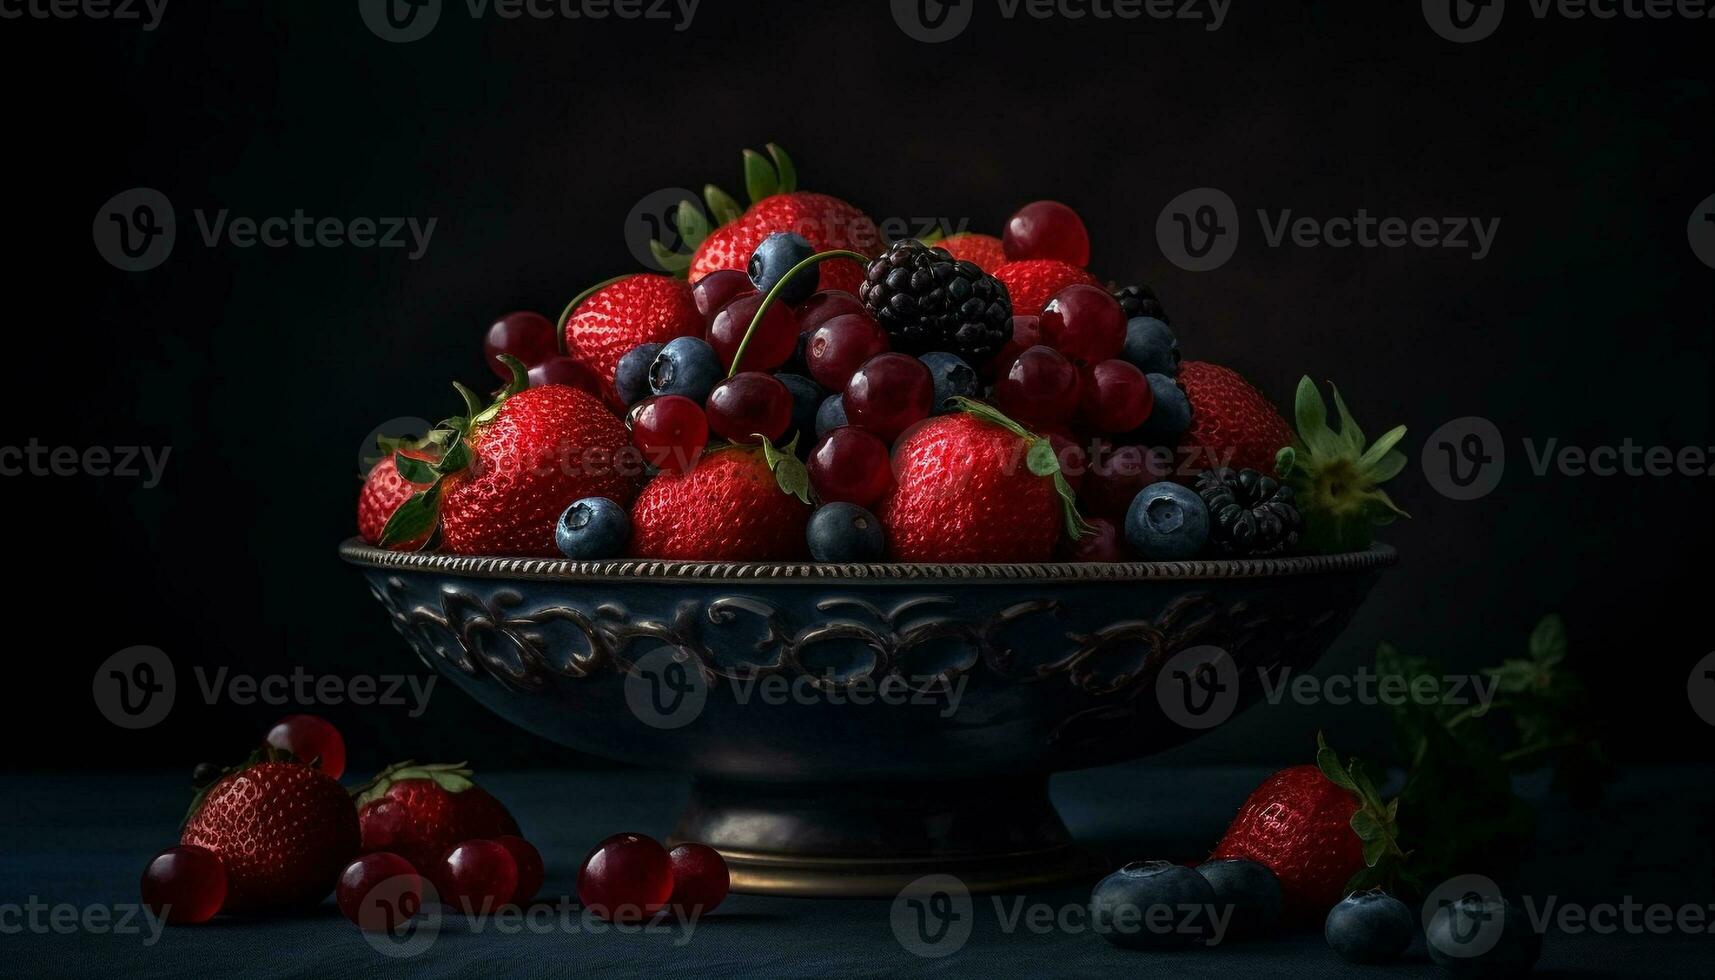 Sweet berries on wood, a healthy treat generated by AI photo